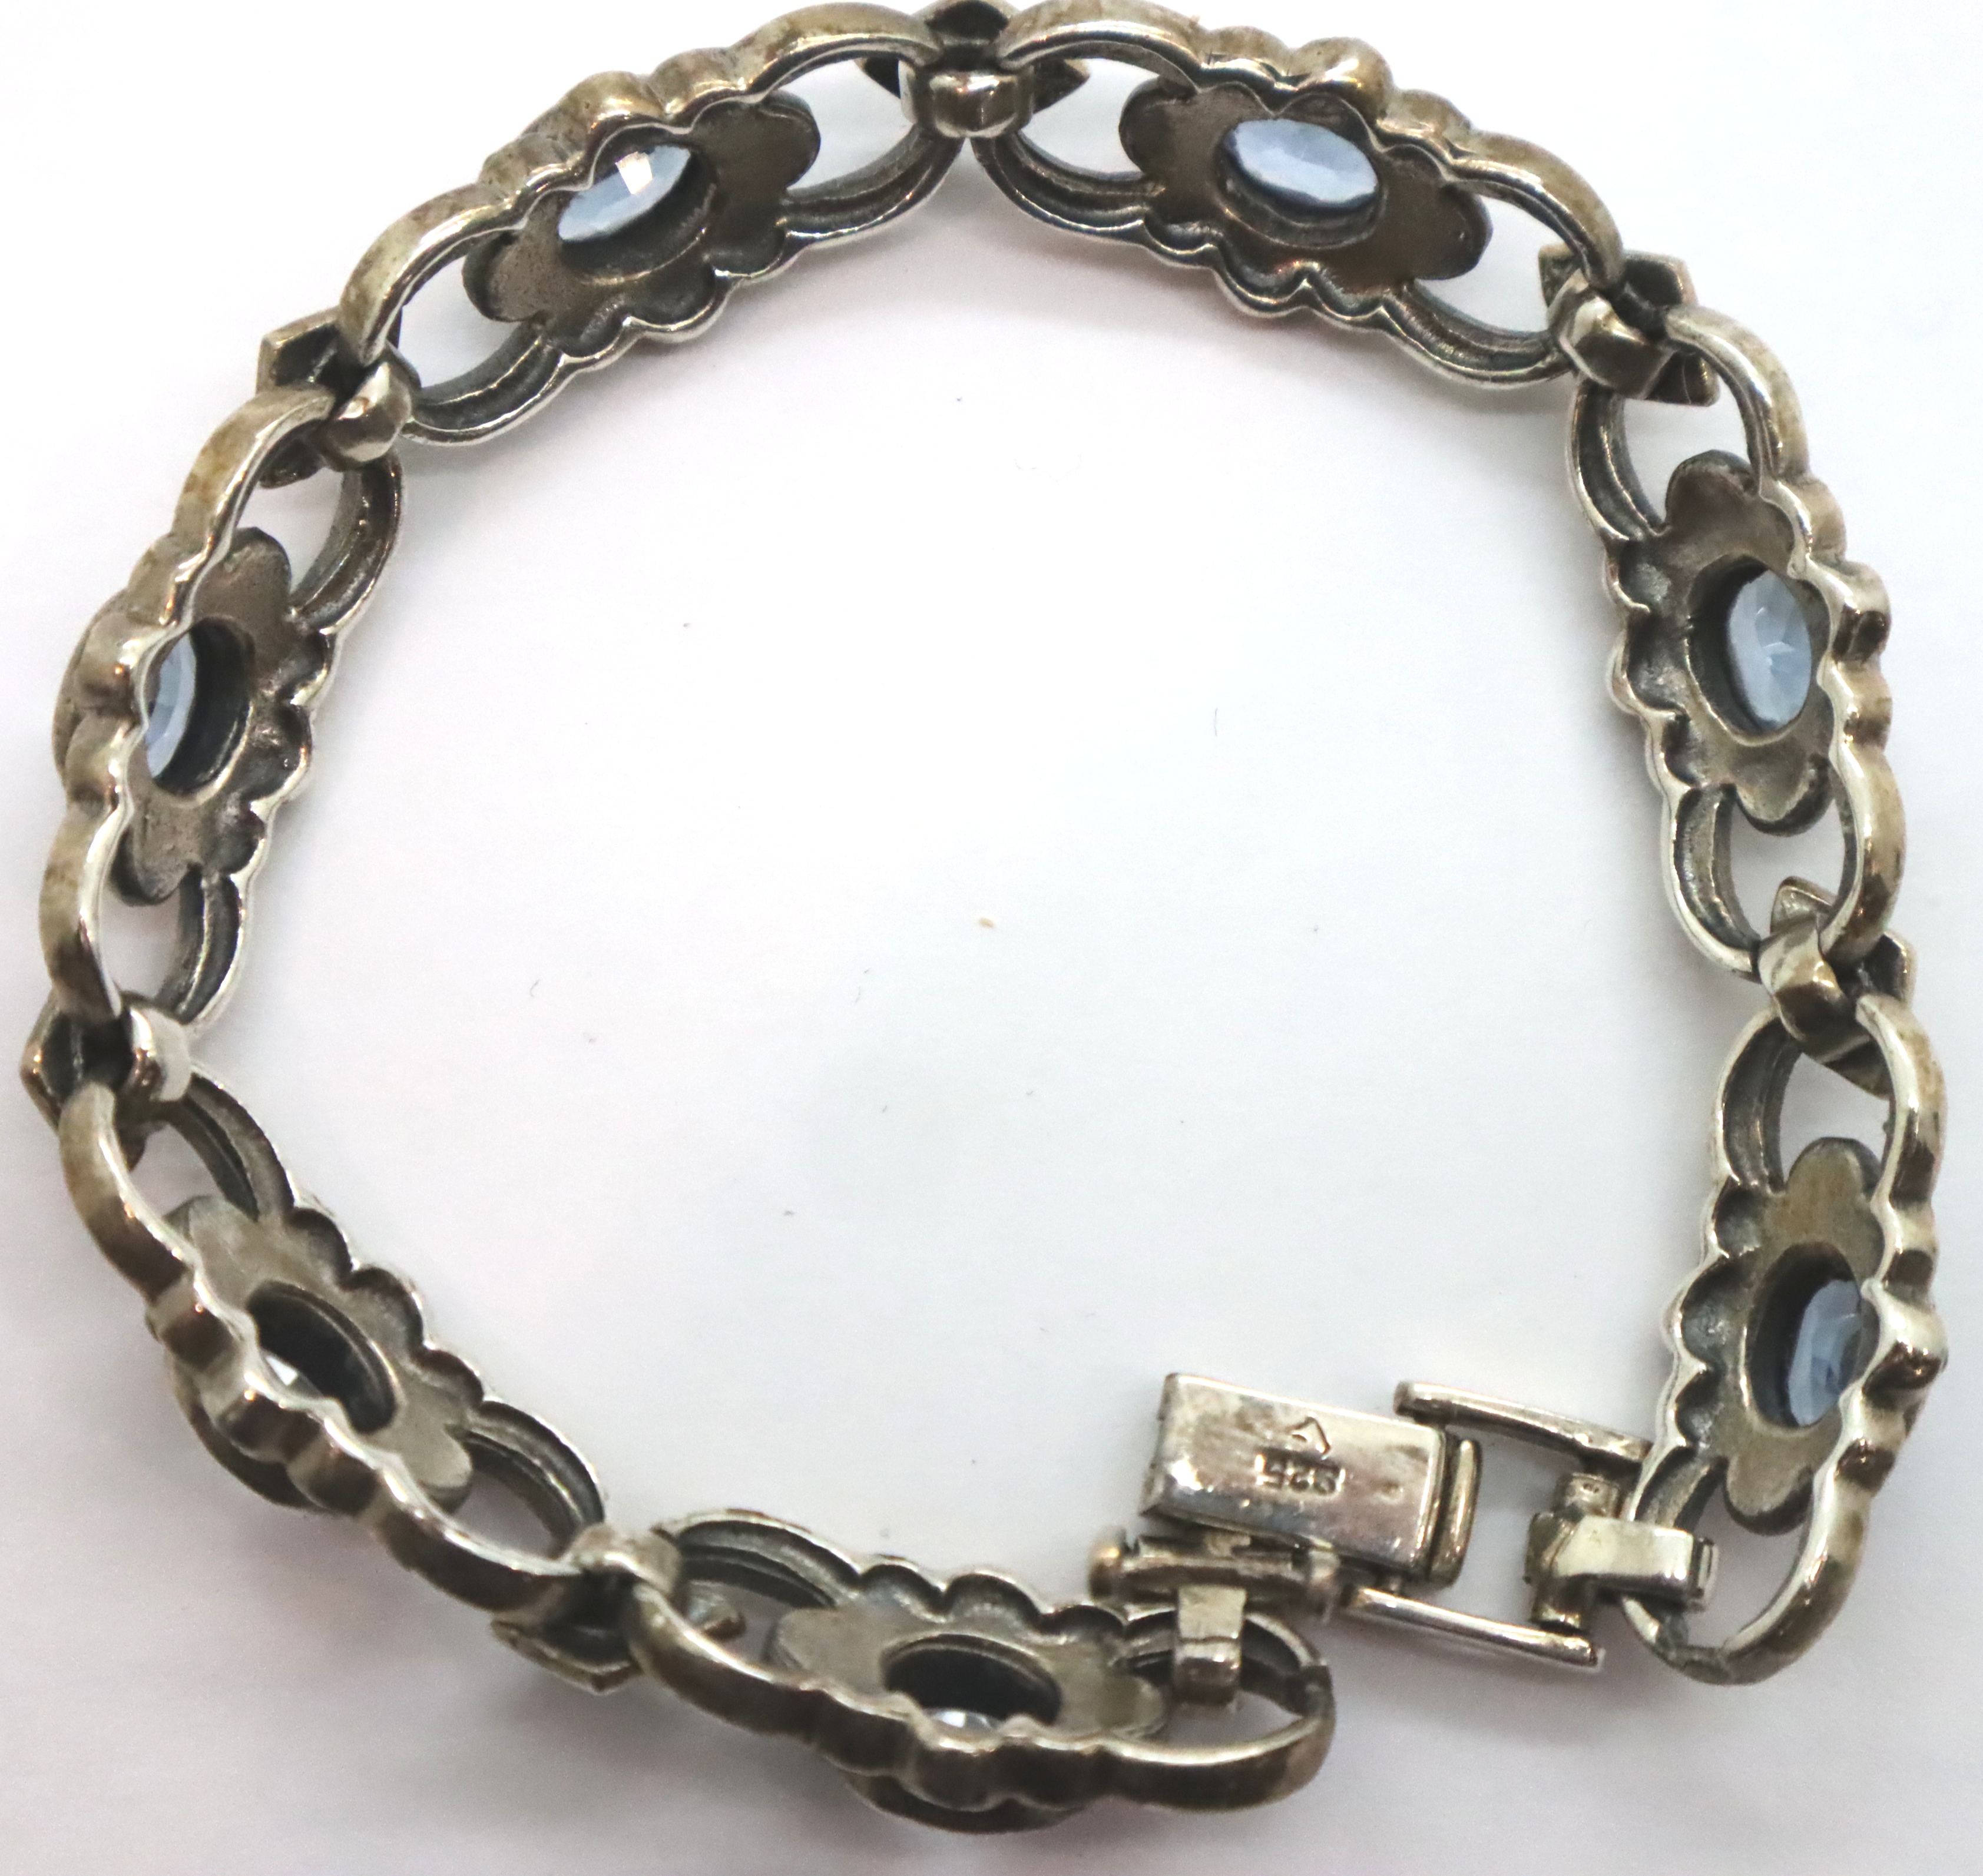 Marcasite bracelet set with blue topaz. P&P Group 1 (£14+VAT for the first lot and £1+VAT for - Image 2 of 2